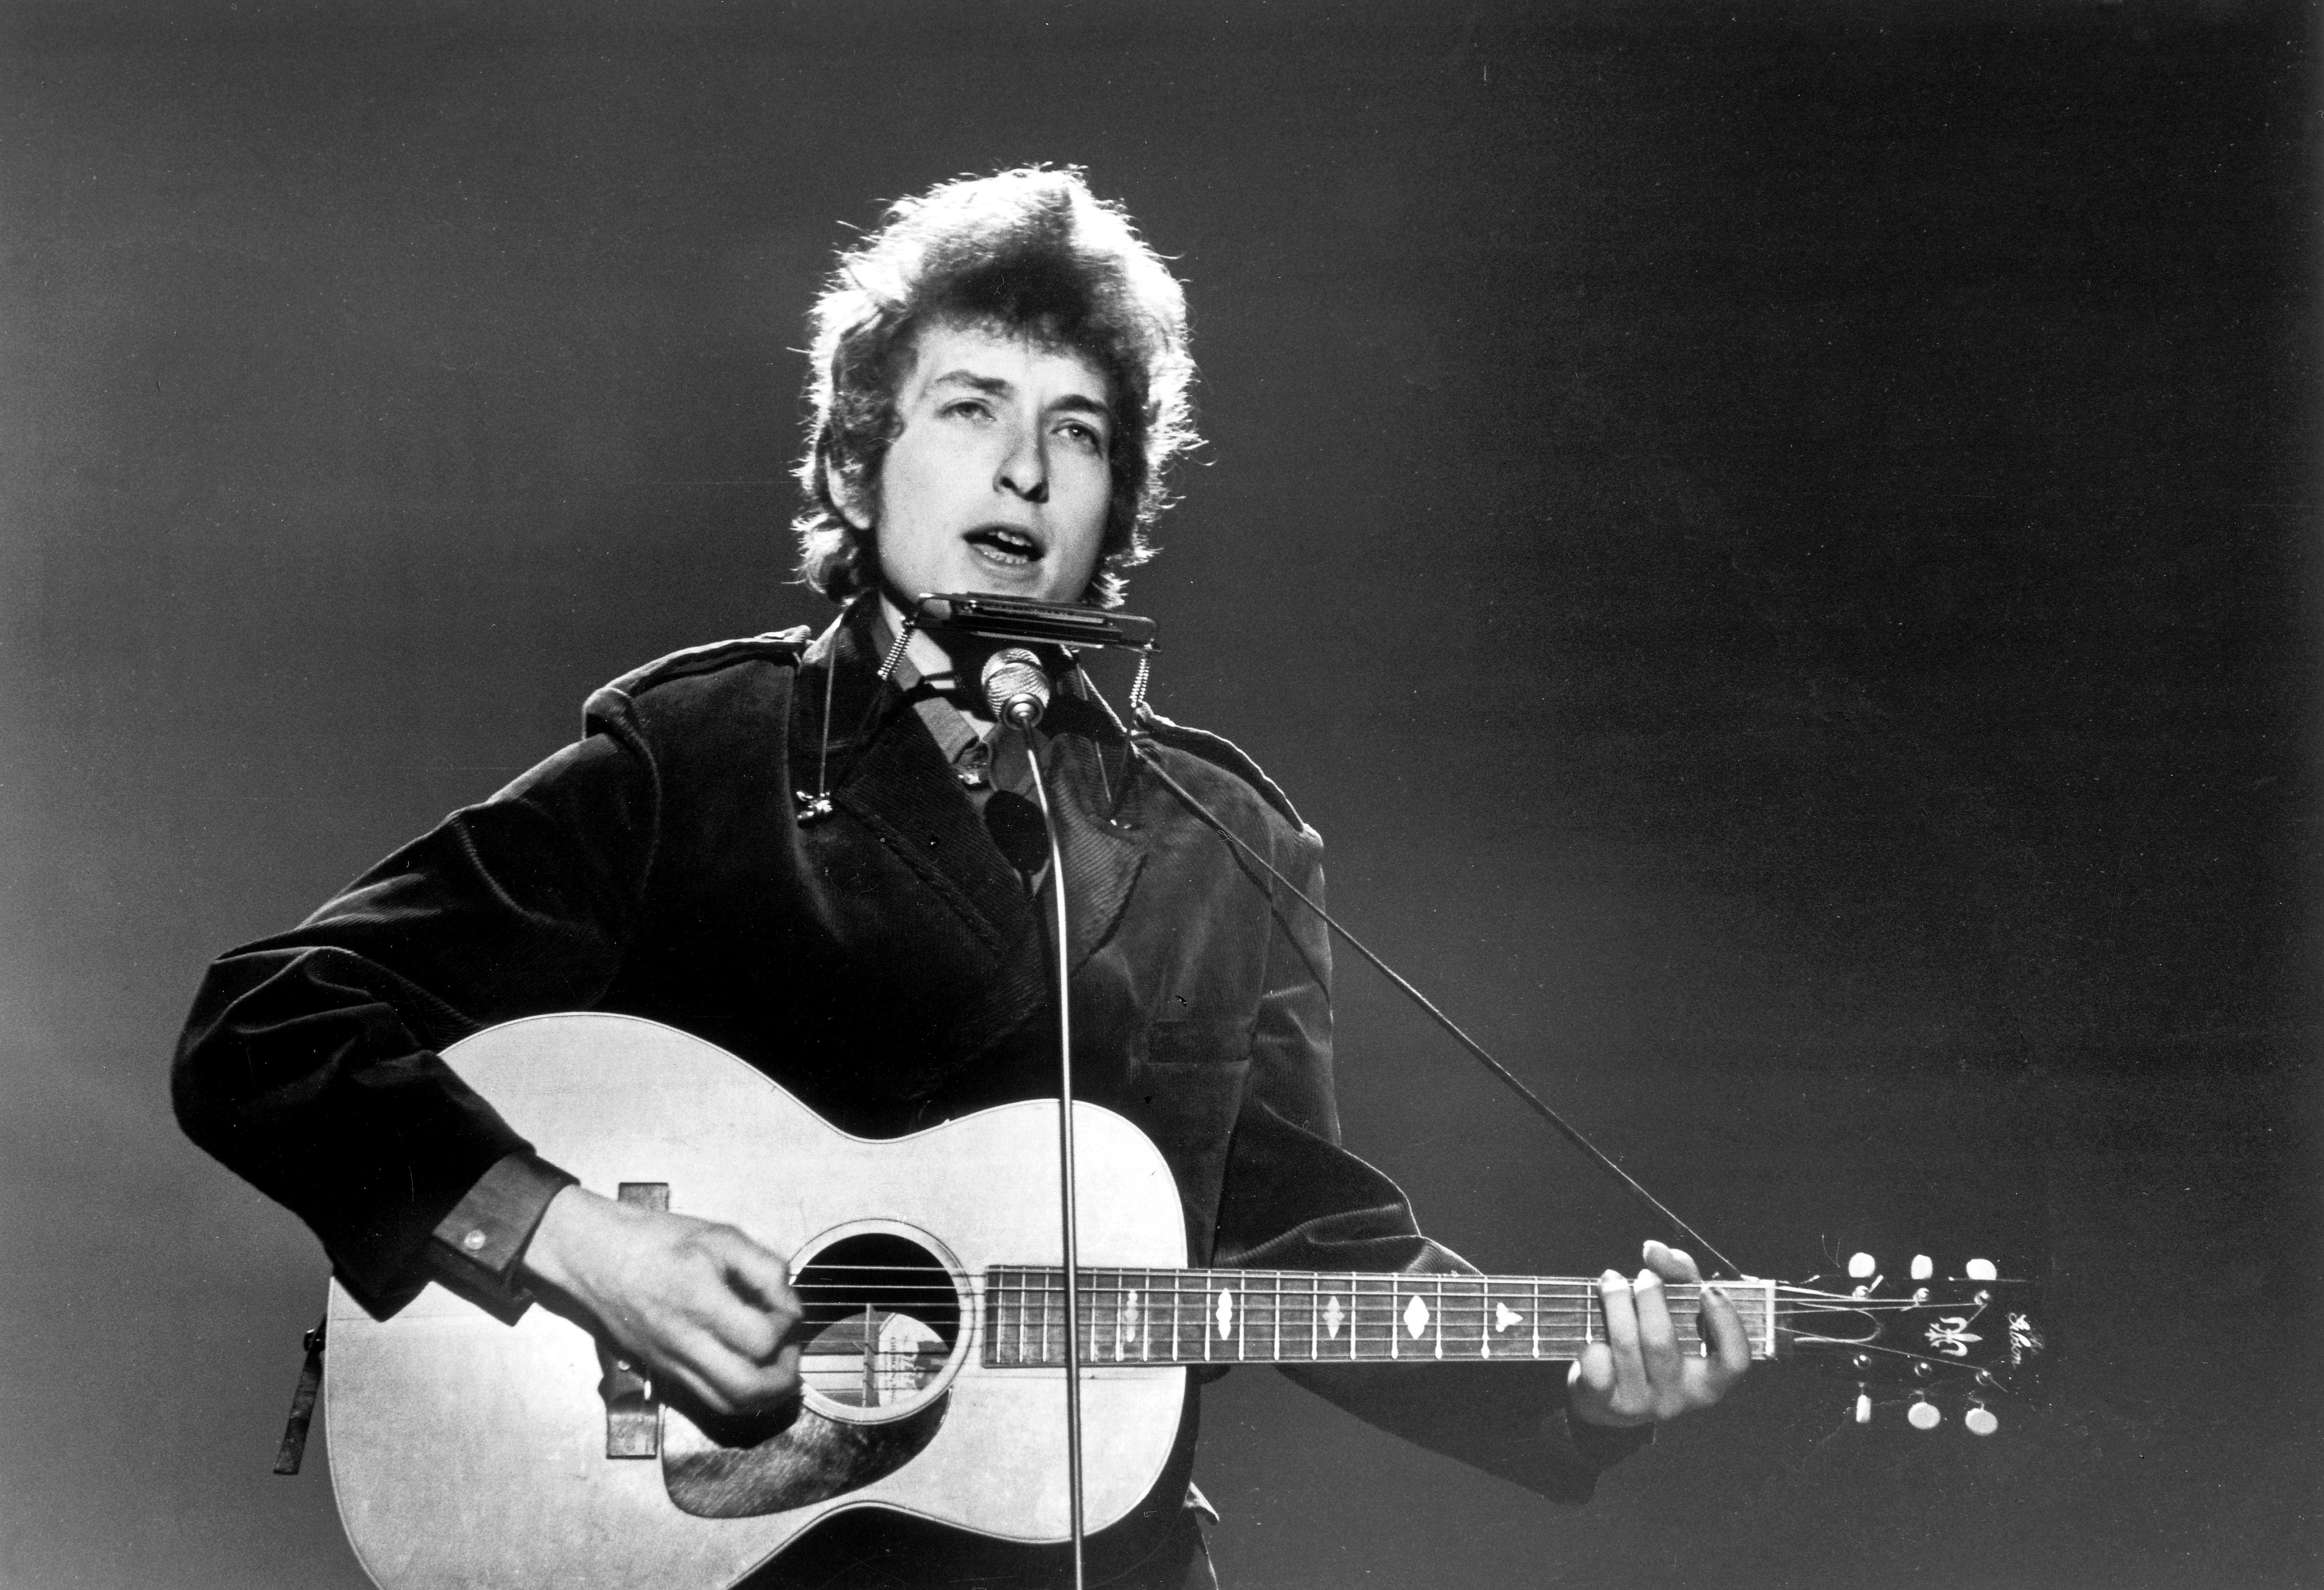 Bob Dylan, performing on a TV show at the BBC TV Center in the early 70s | Source: Getty Image